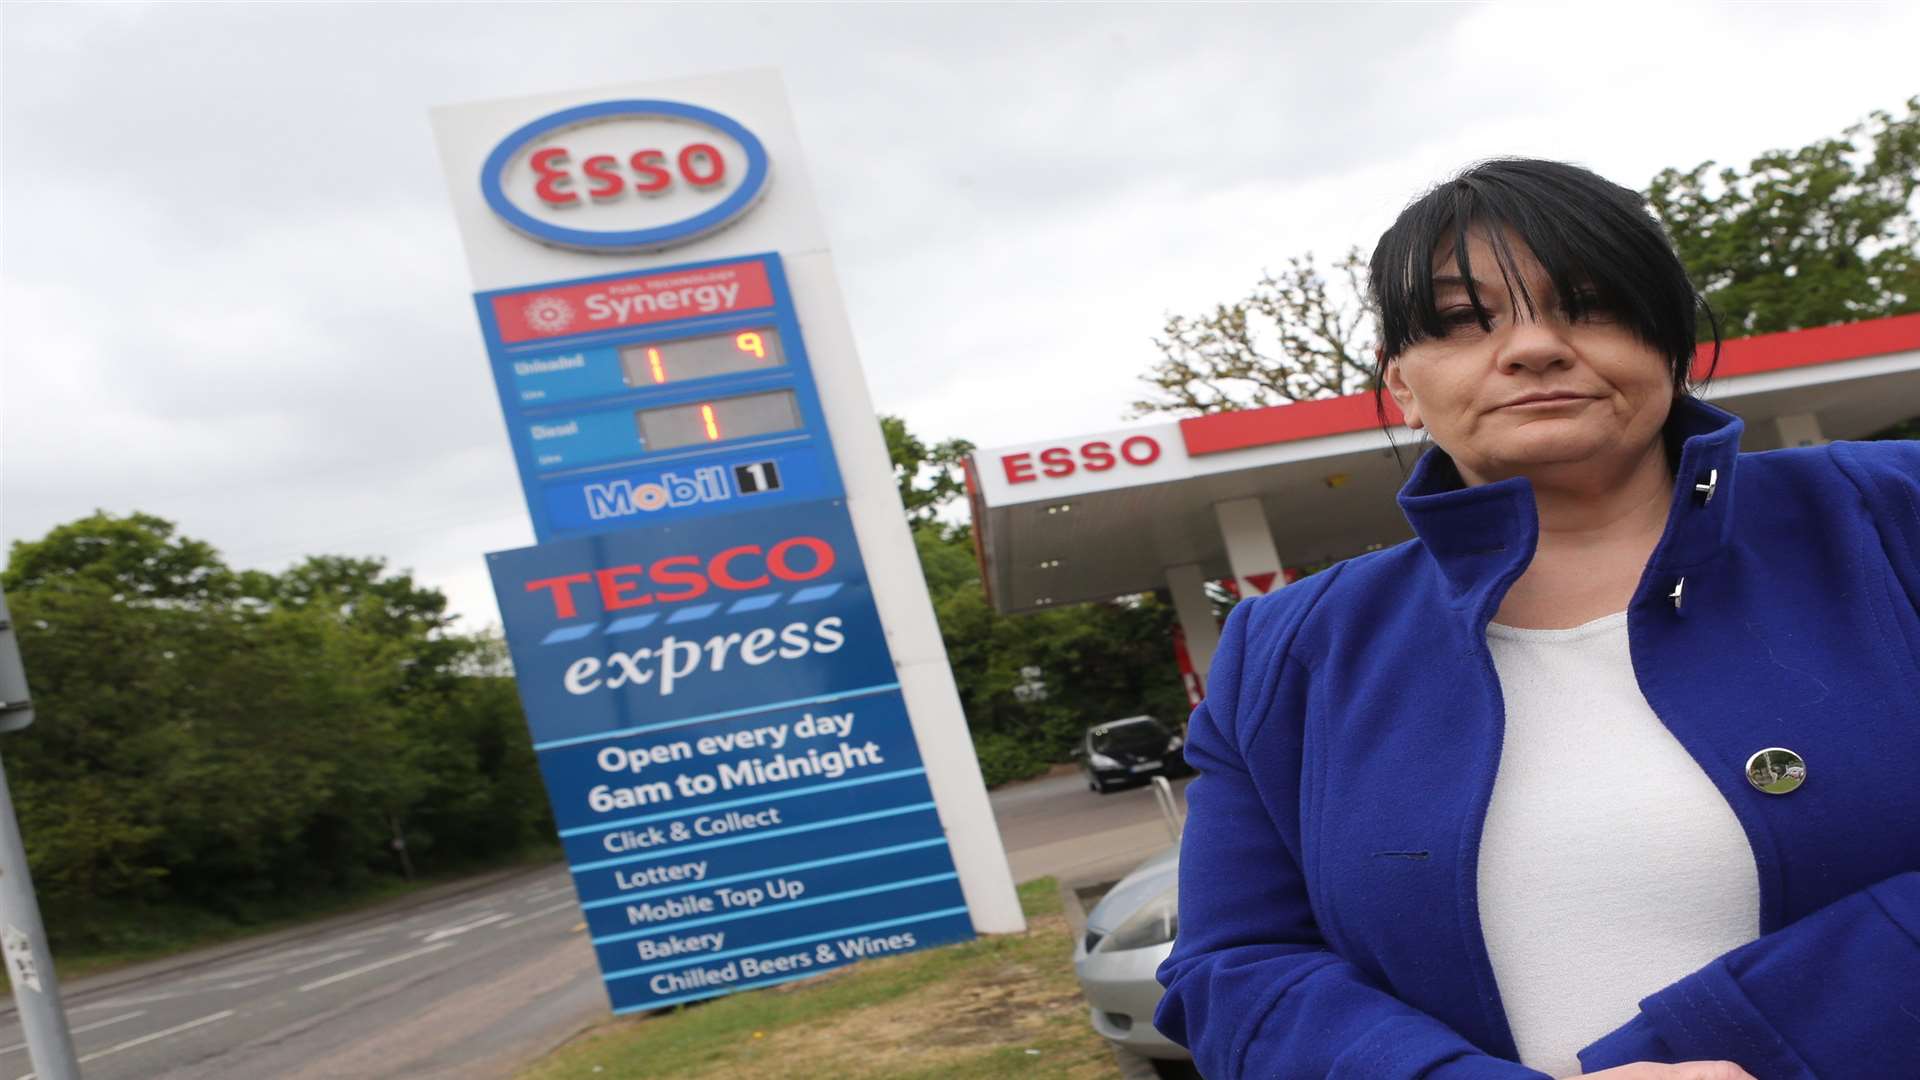 Nicky Watson says she's not welcome at the Esso Garage at the Tesco Express in Larkfield